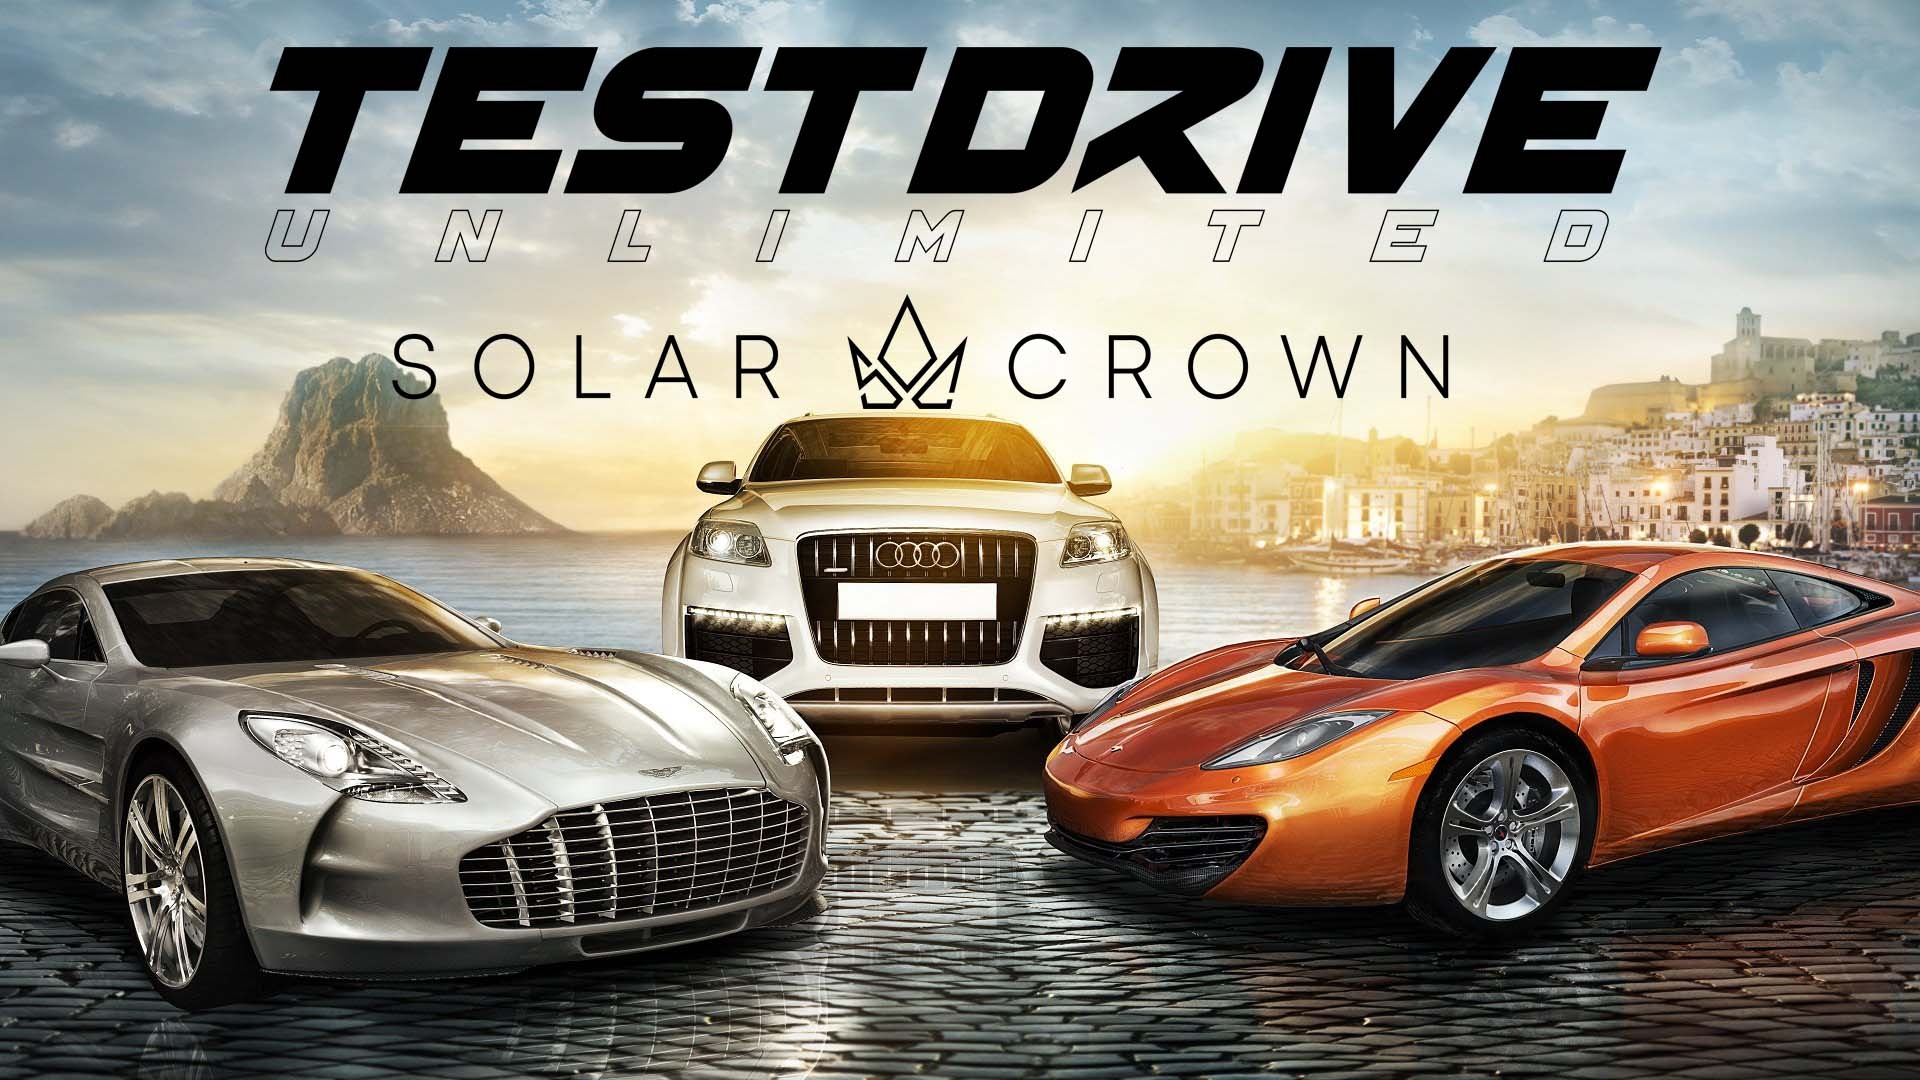 Test Drive Unlimited Solar Crown: The "Streets" and the "Sharps", Two clans with differing views of the world. 1920x1080 Full HD Wallpaper.